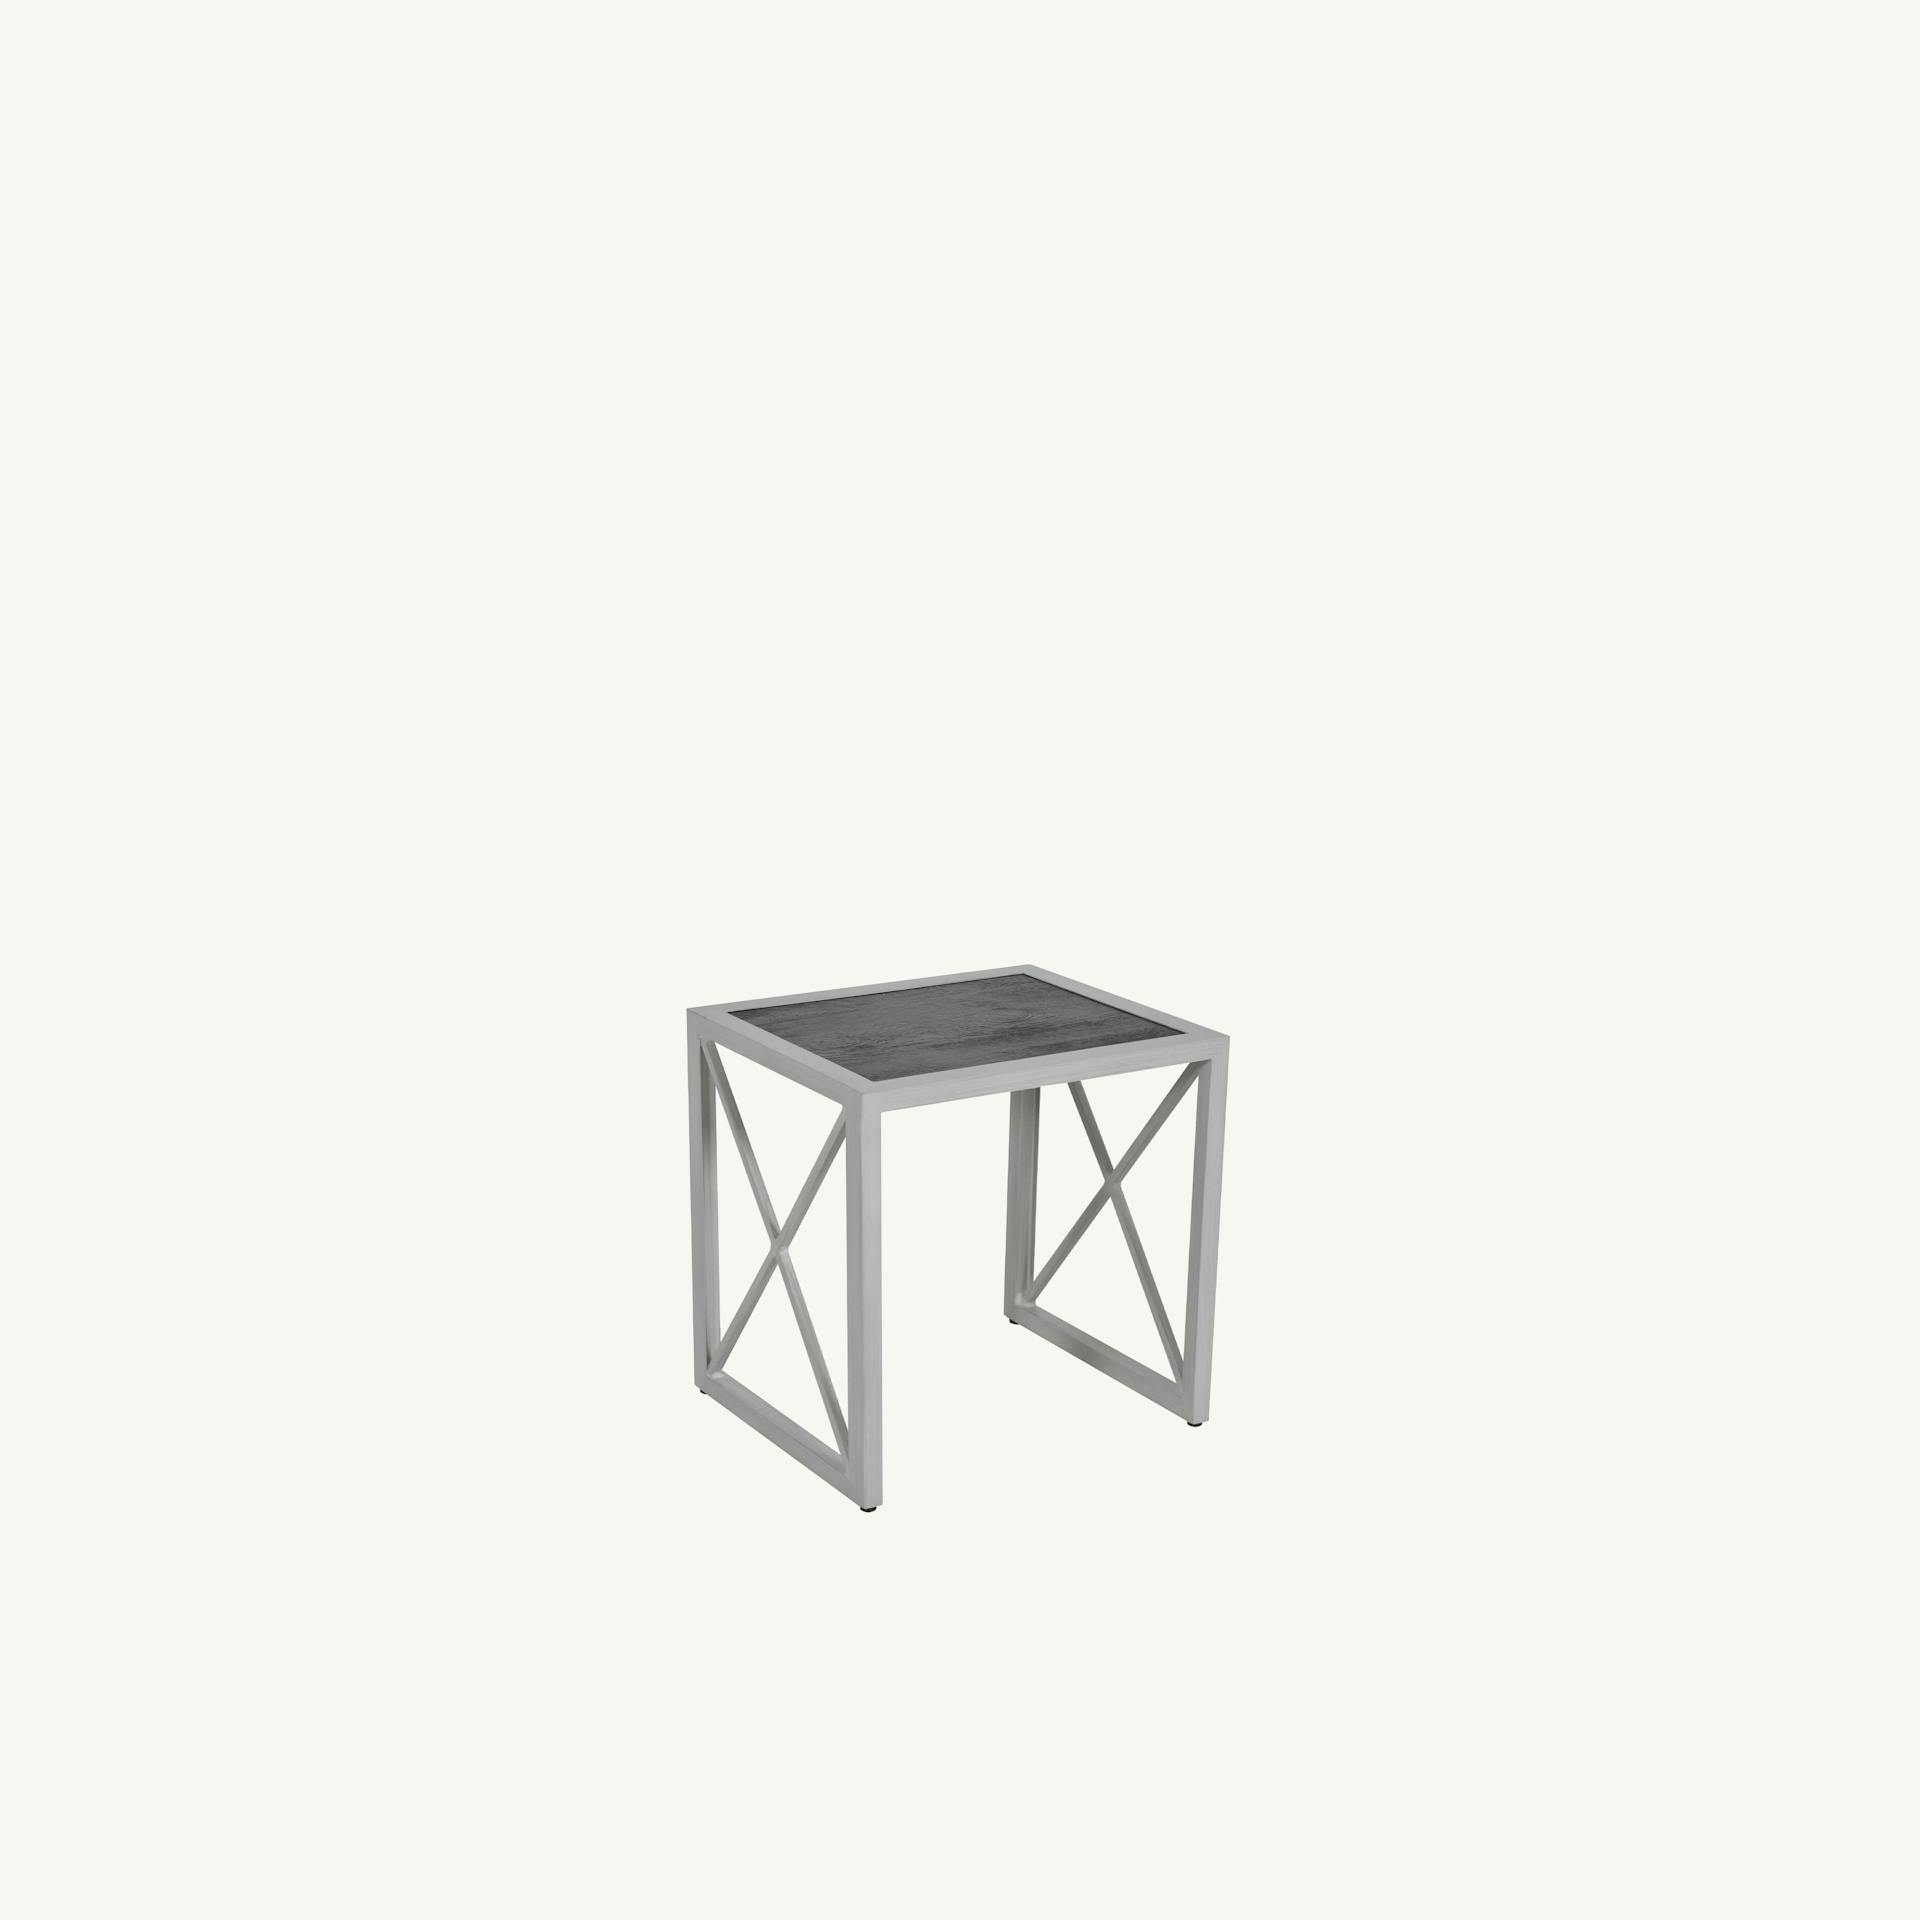 19" Square Nesting Side Tables - Xaria